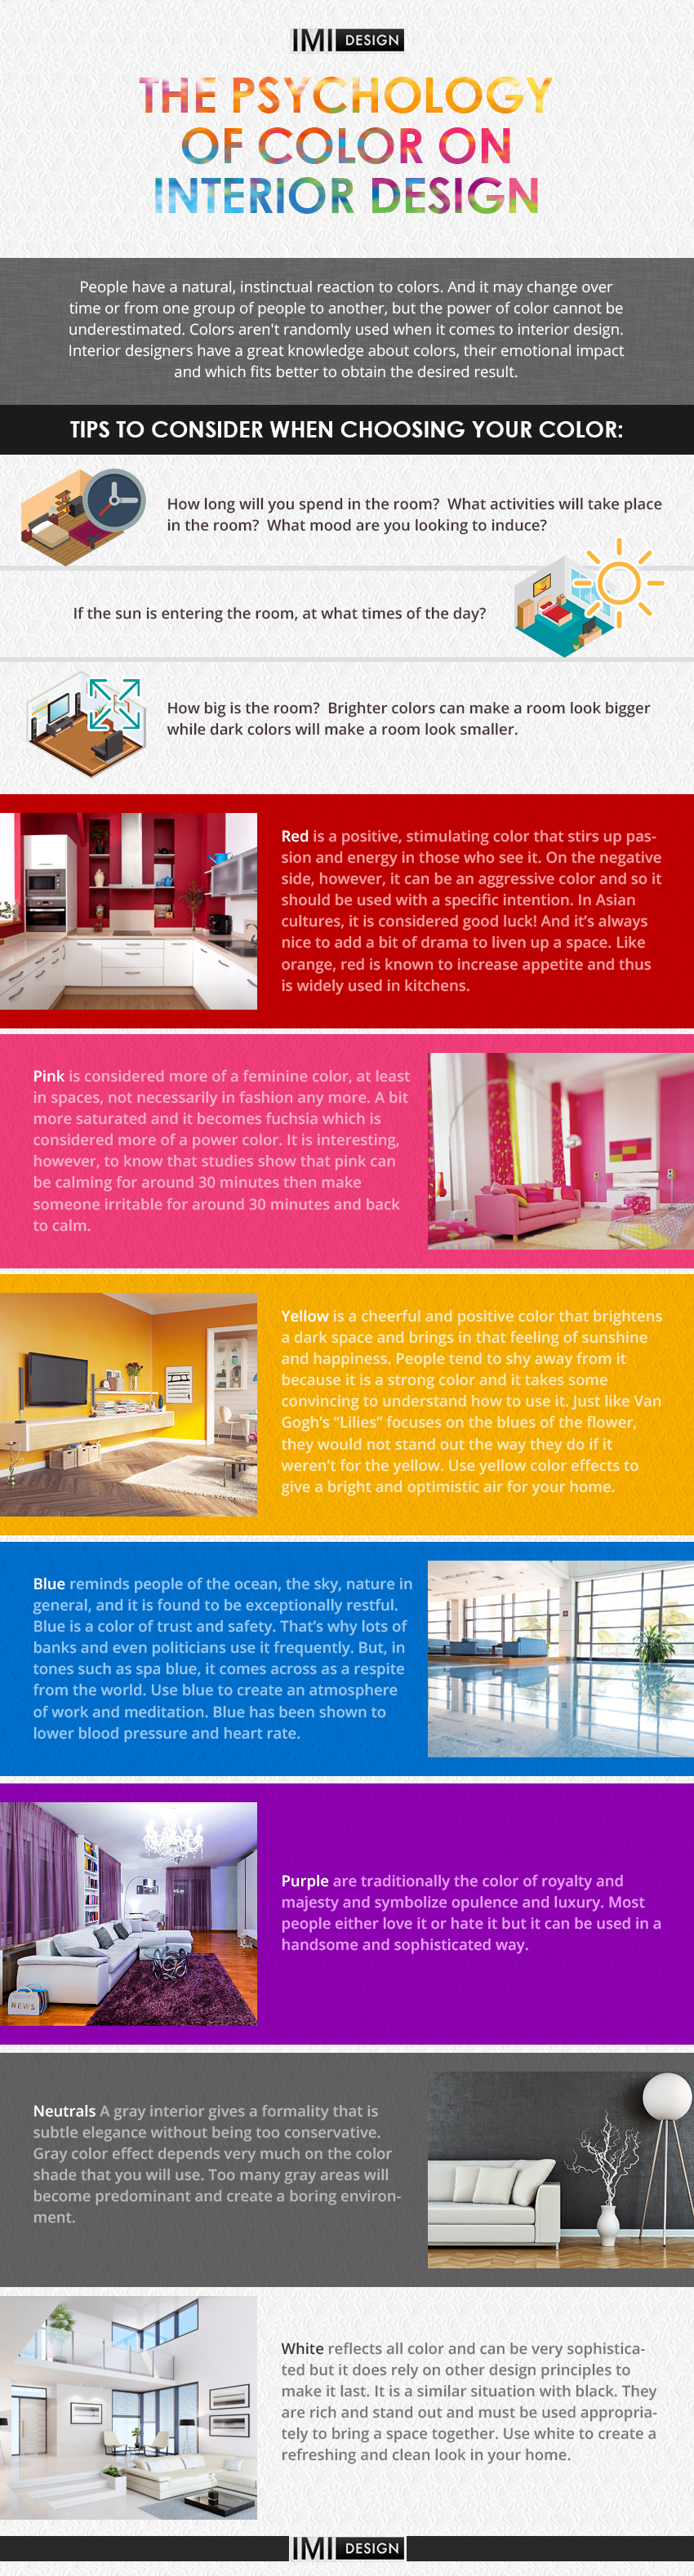 https://www.bruzzesehomeimprovements.com/wp-content/uploads/2016/11/The-Psychology-of-Color-on-Interior-Design-Infographic.jpg